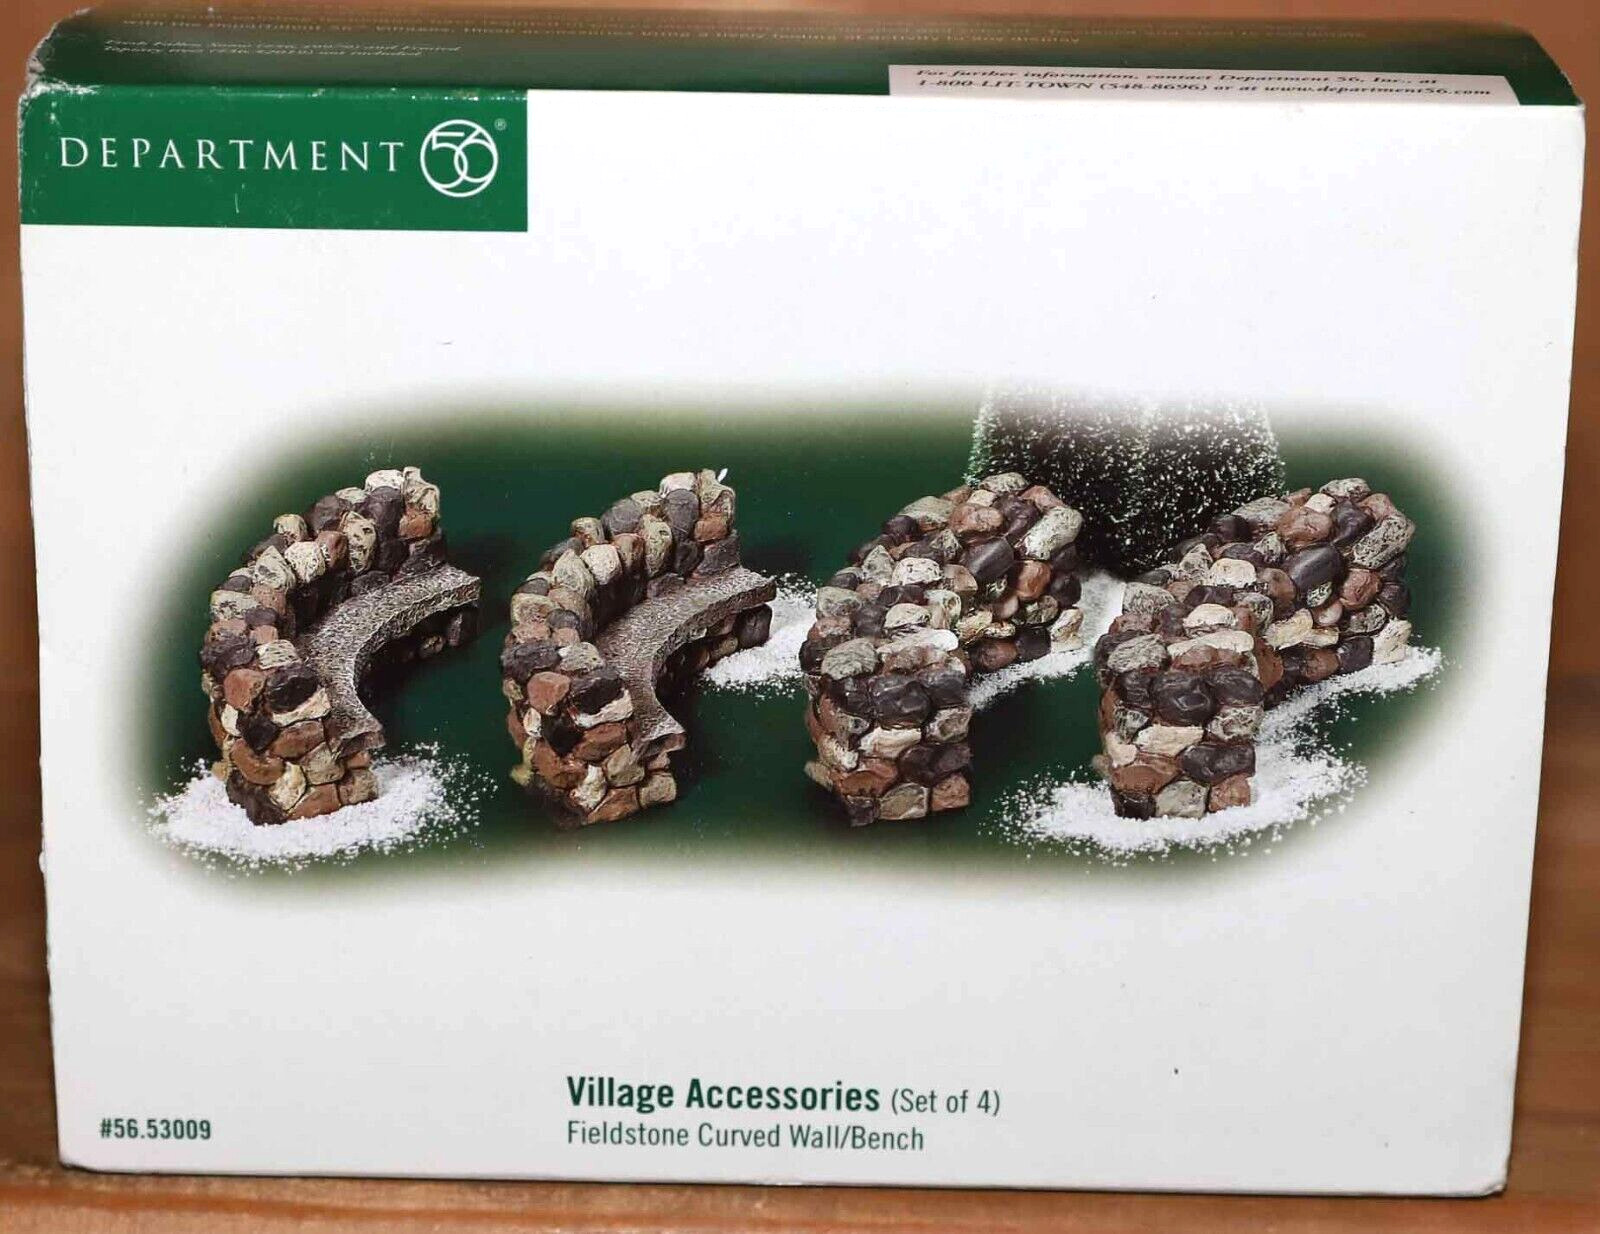 DEPT 56 VILLAGE FIELDSTONE CURVED WALL BENCH SET OF 4 ACCESSORIES 53009 SNOW